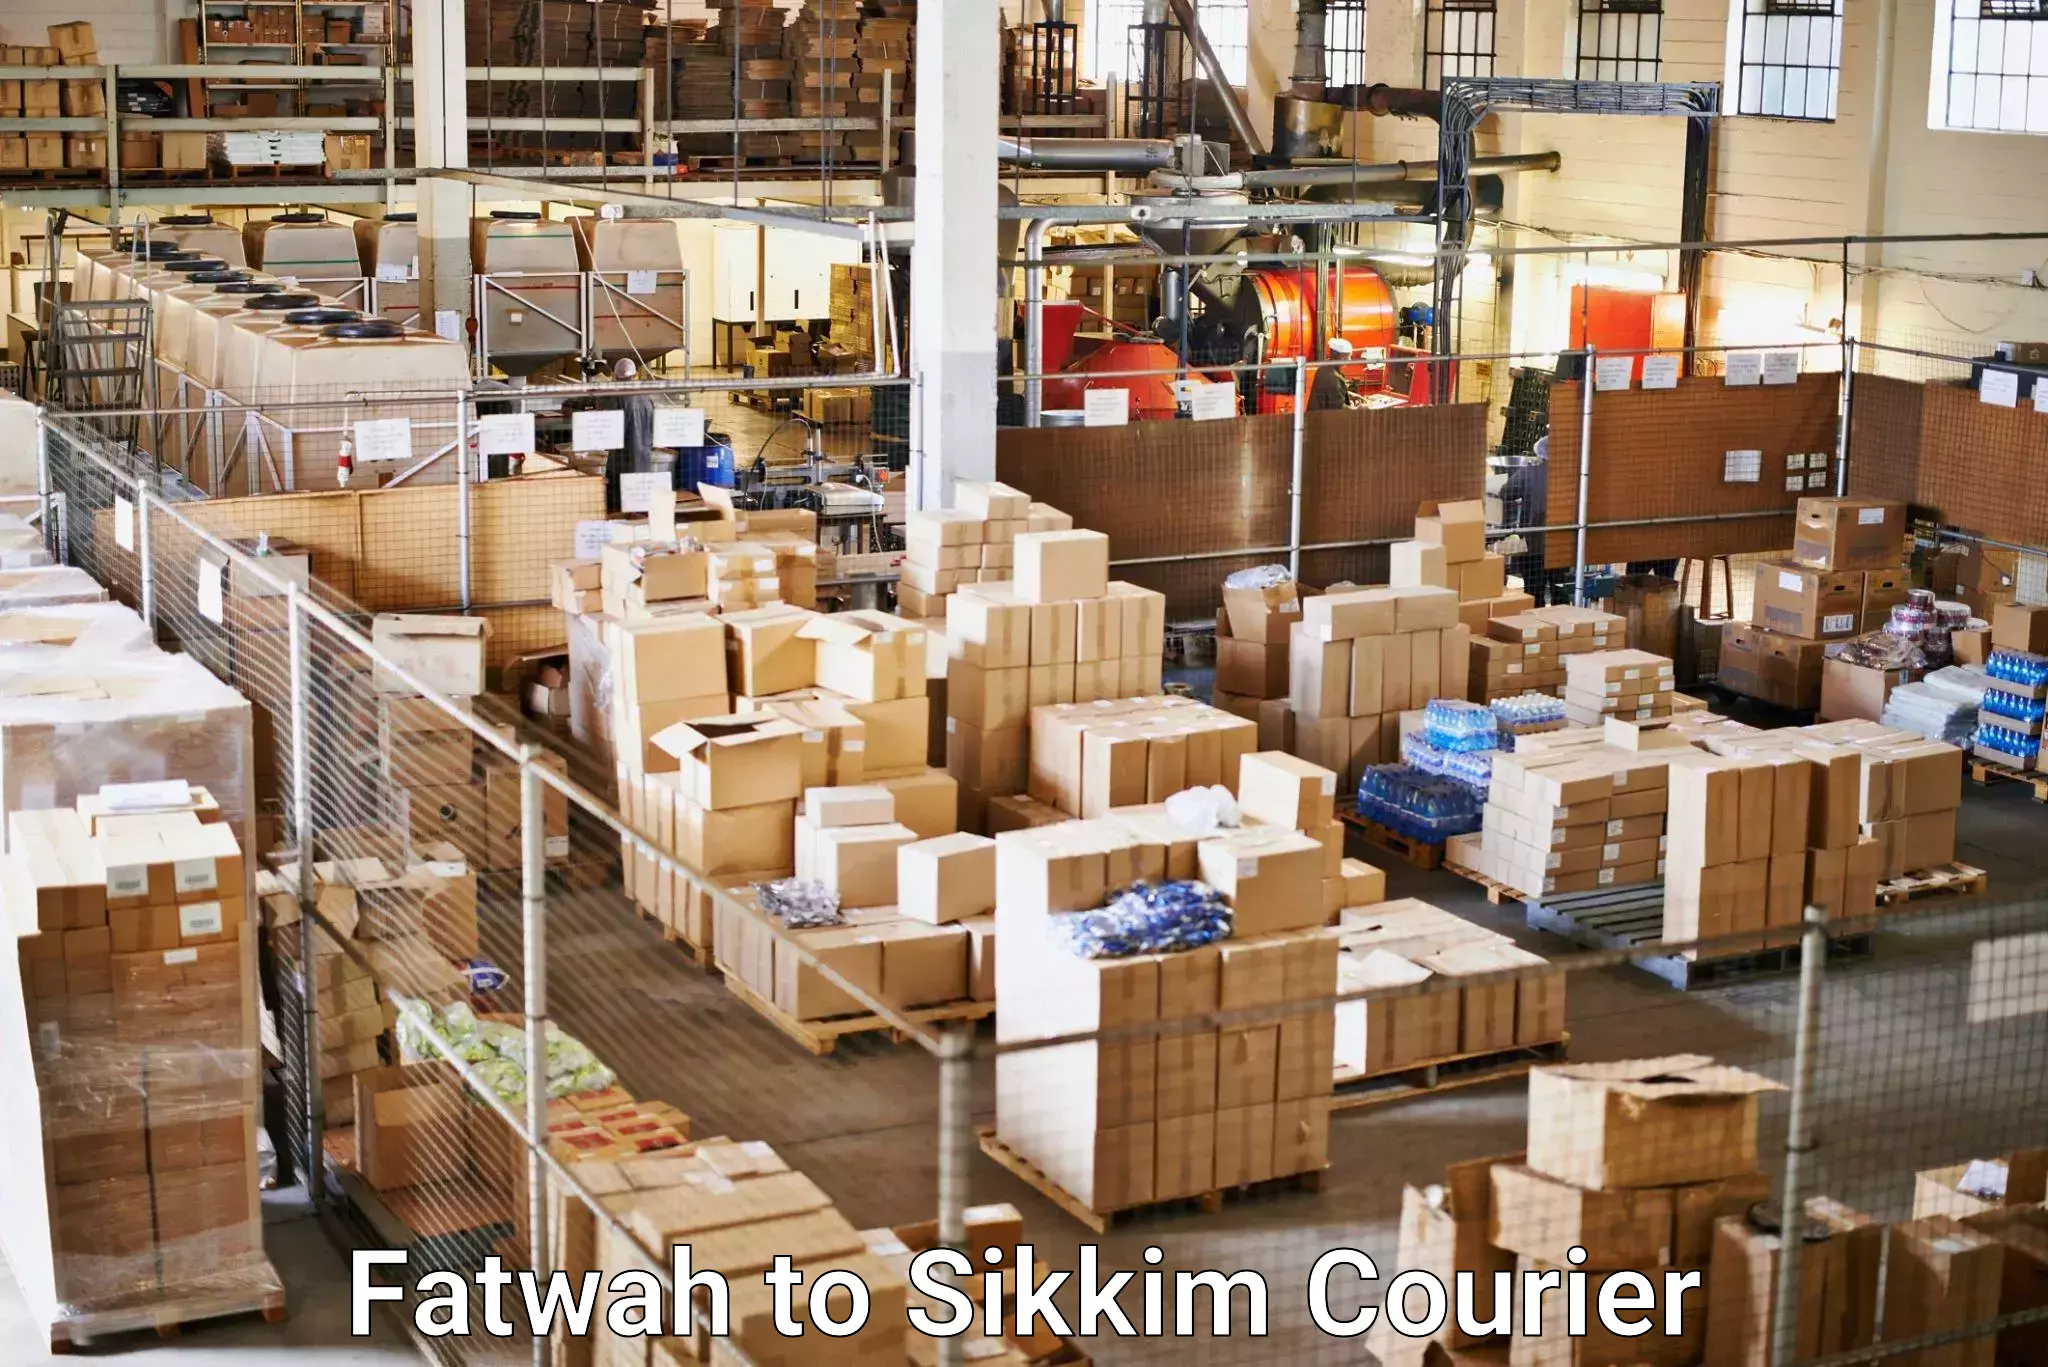 Logistics service provider Fatwah to East Sikkim